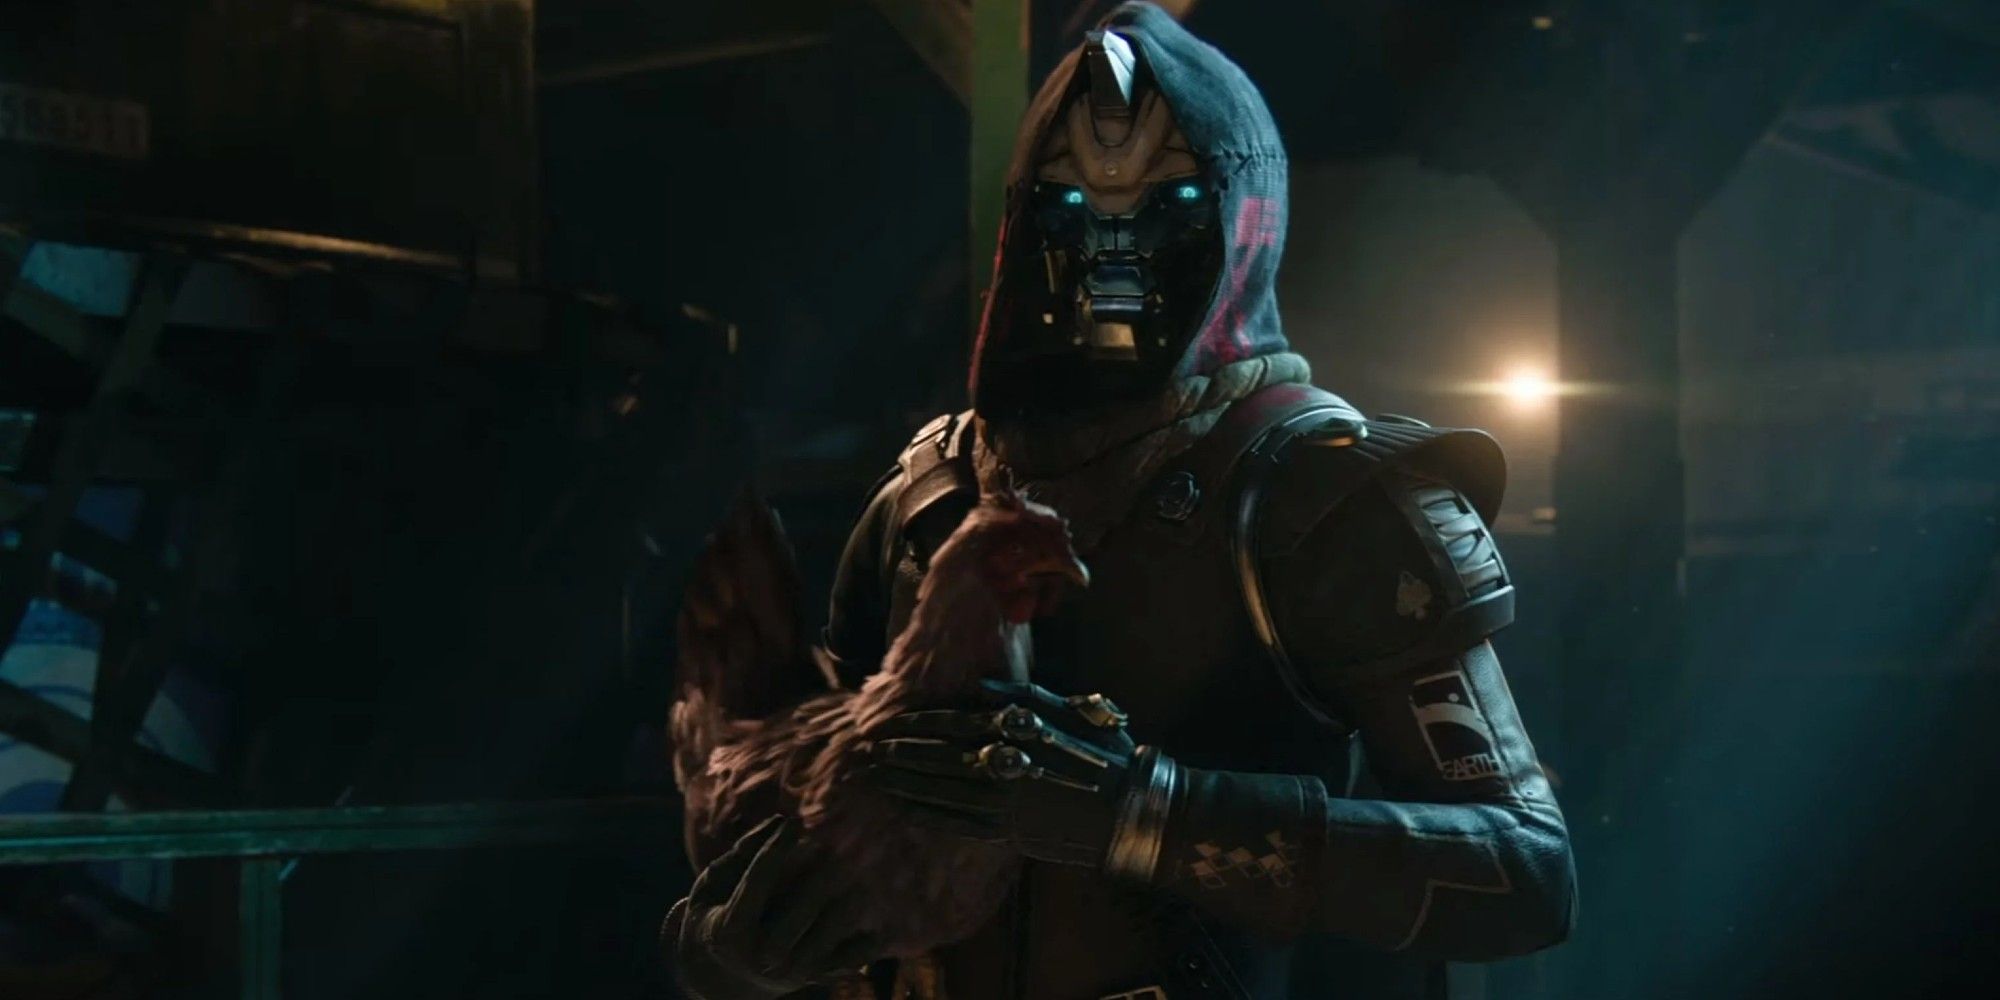 cayde-6 holding a chicken in destiny